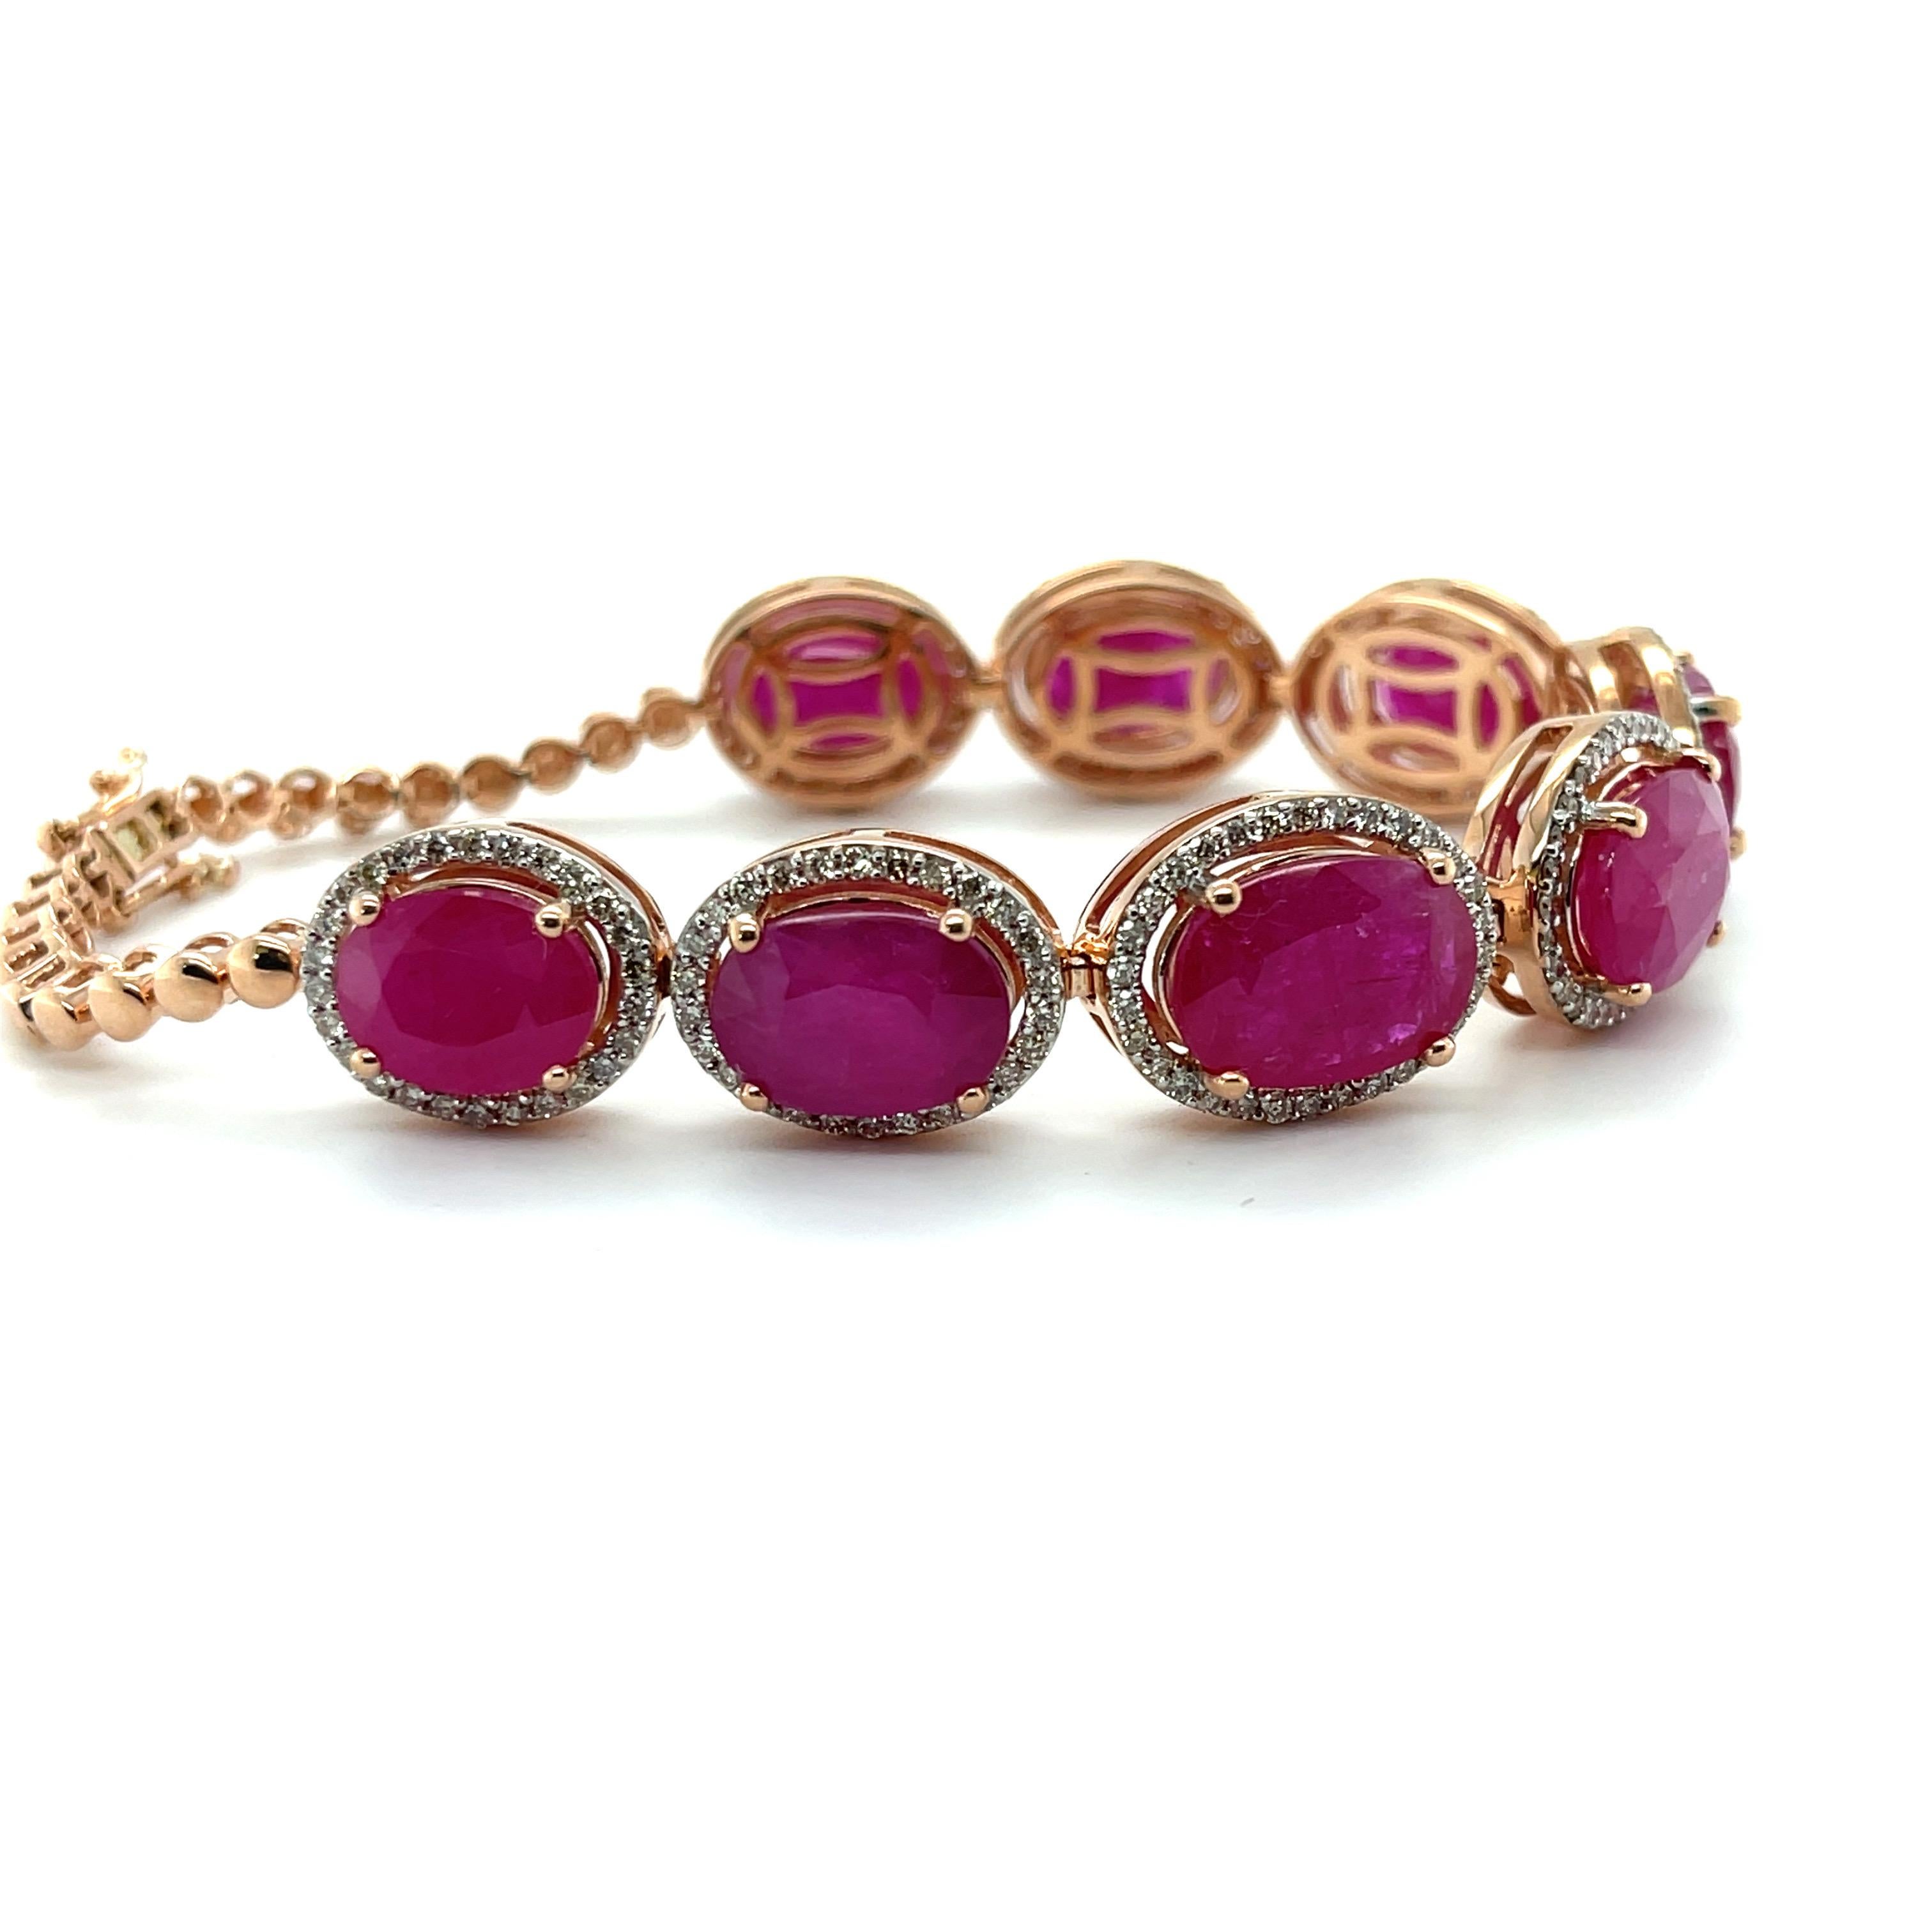 An absolutely gorgeous Natural Ruby and Diamond bracelet, crafted in fourteen karat gold, complemented by a stunning polished finished design. 


Item 1
One ladies - 14ct rose gold chain bracelet, polished finish, with box clasp, with two figure
8